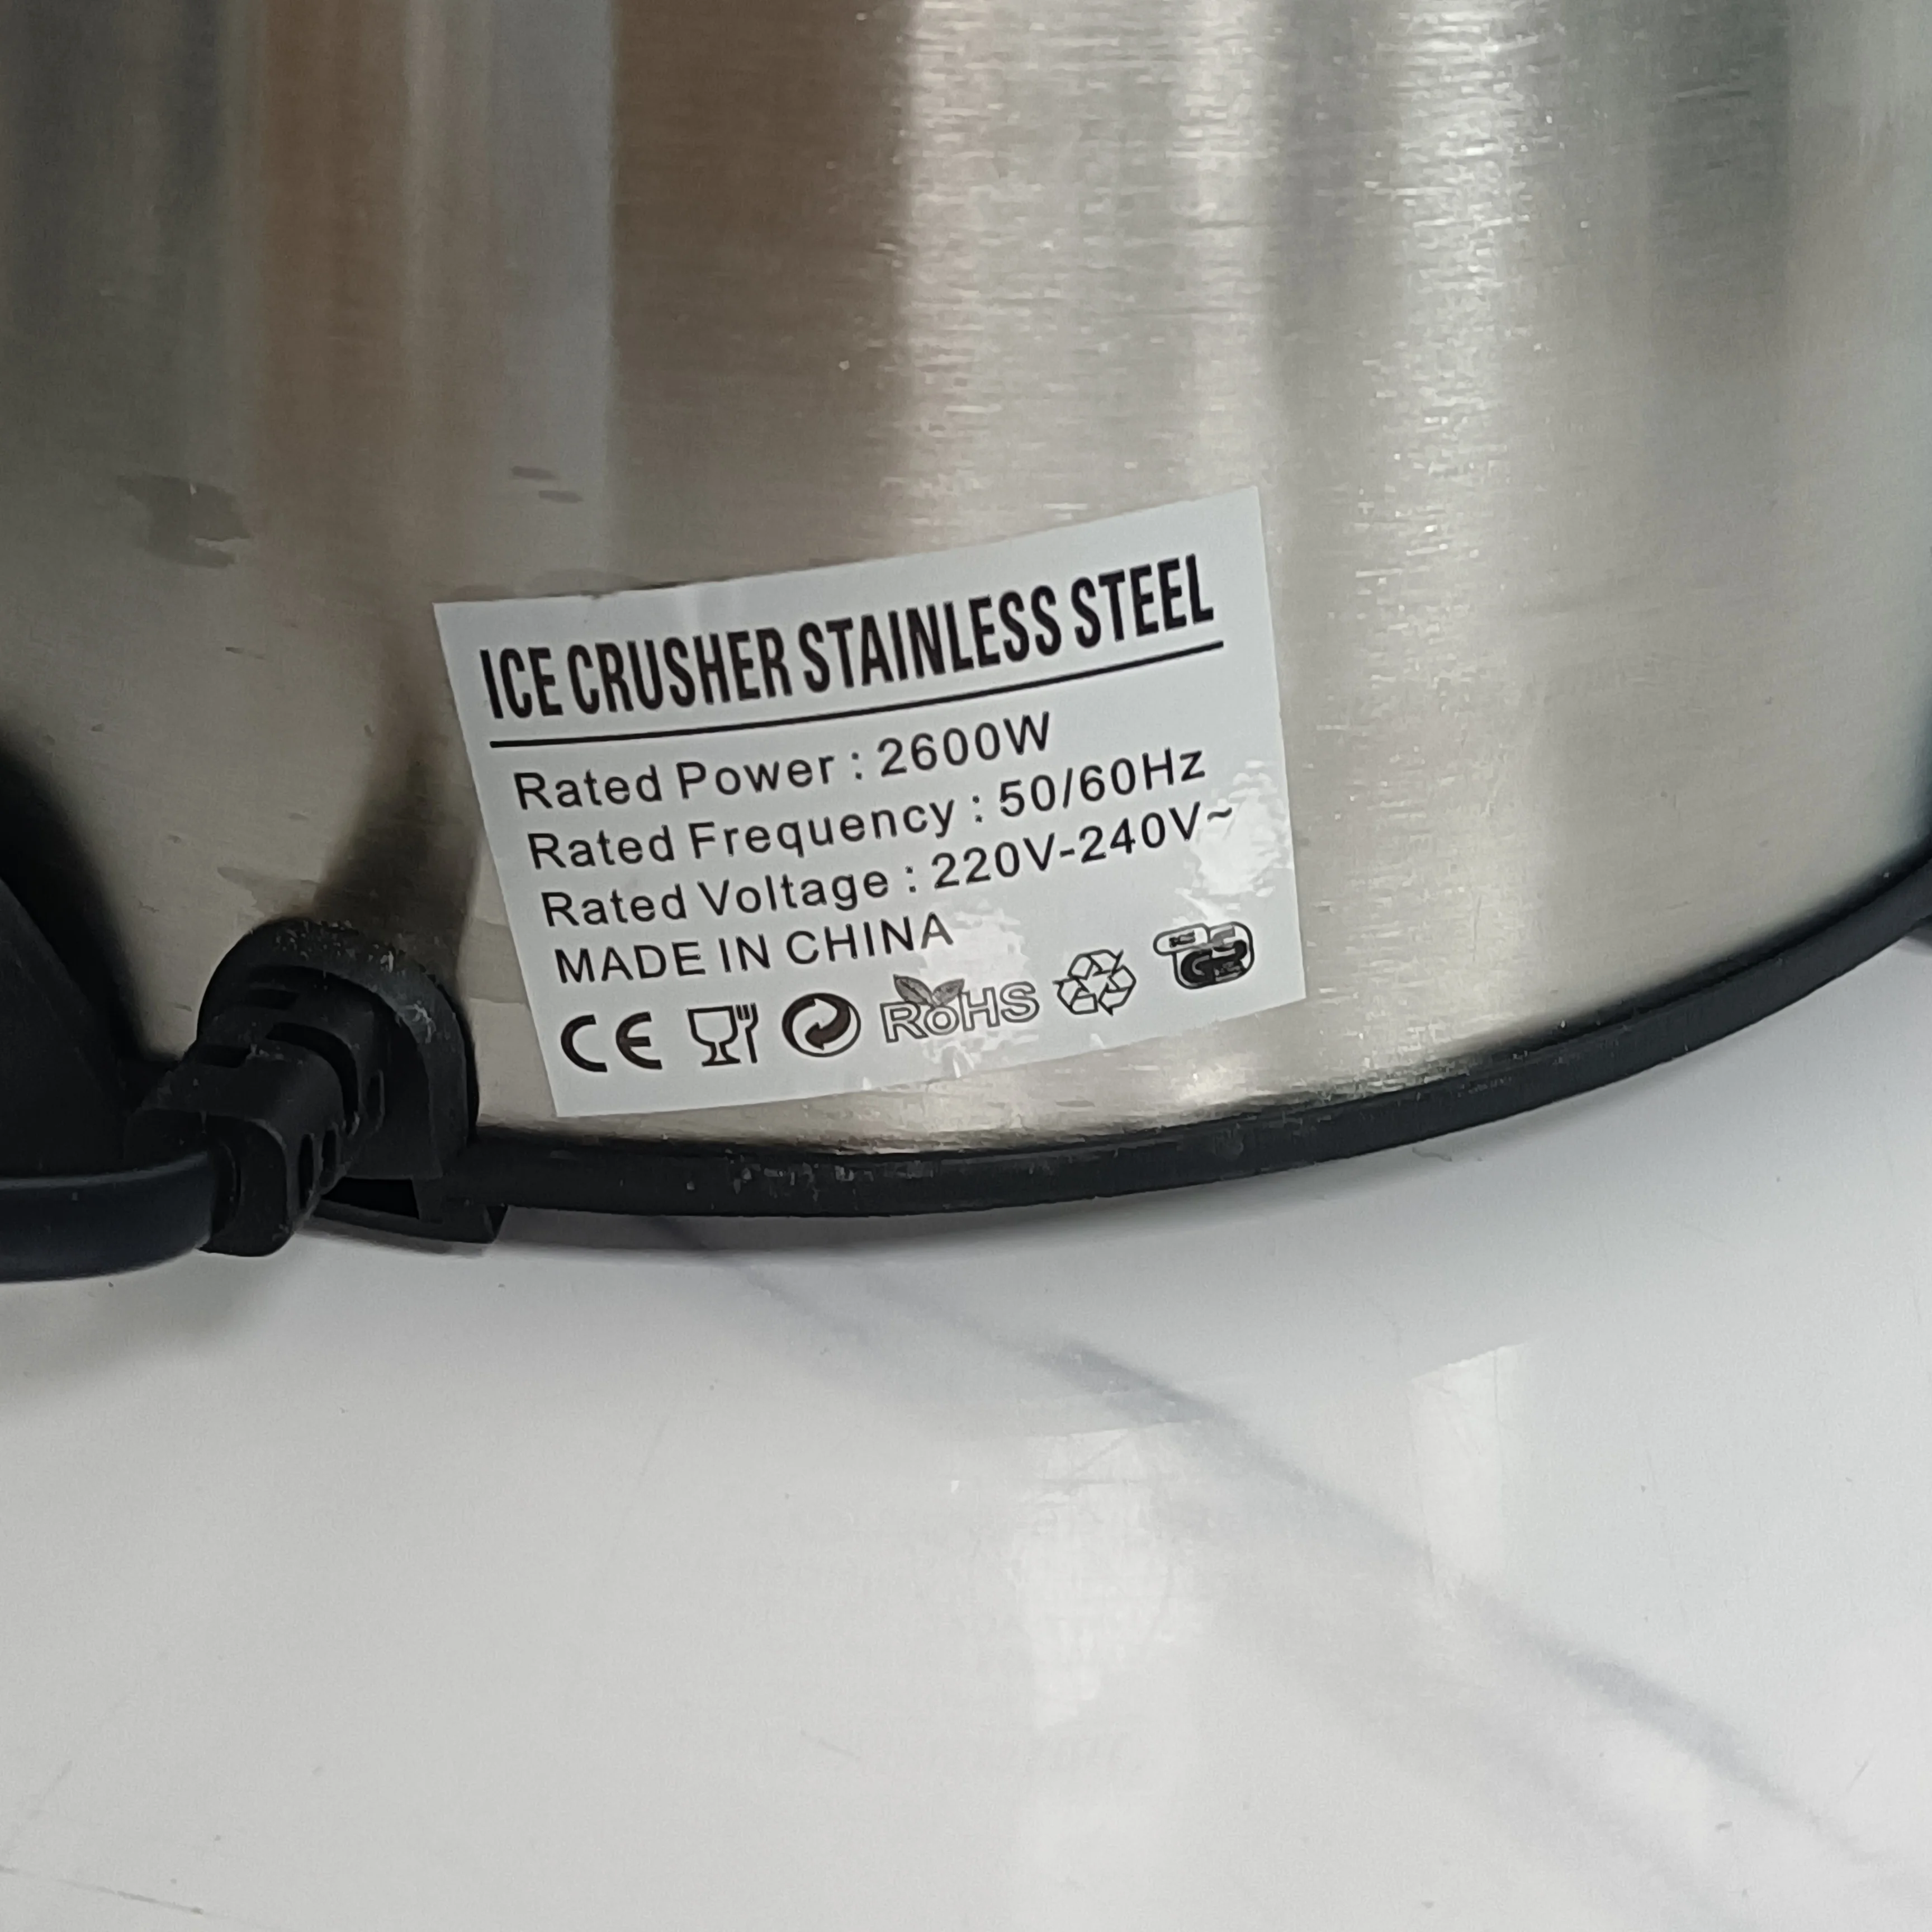 Kenwoodss Ice Crusher Ke-2268 Fruit Juicer Mixer Blender Commercial  Electric Ice Crusher Home Use Ice Crusher Stainless Steel Motor Maker Ice  Crusher Sale - China Ice Crusher and Blender Ice Crusher price